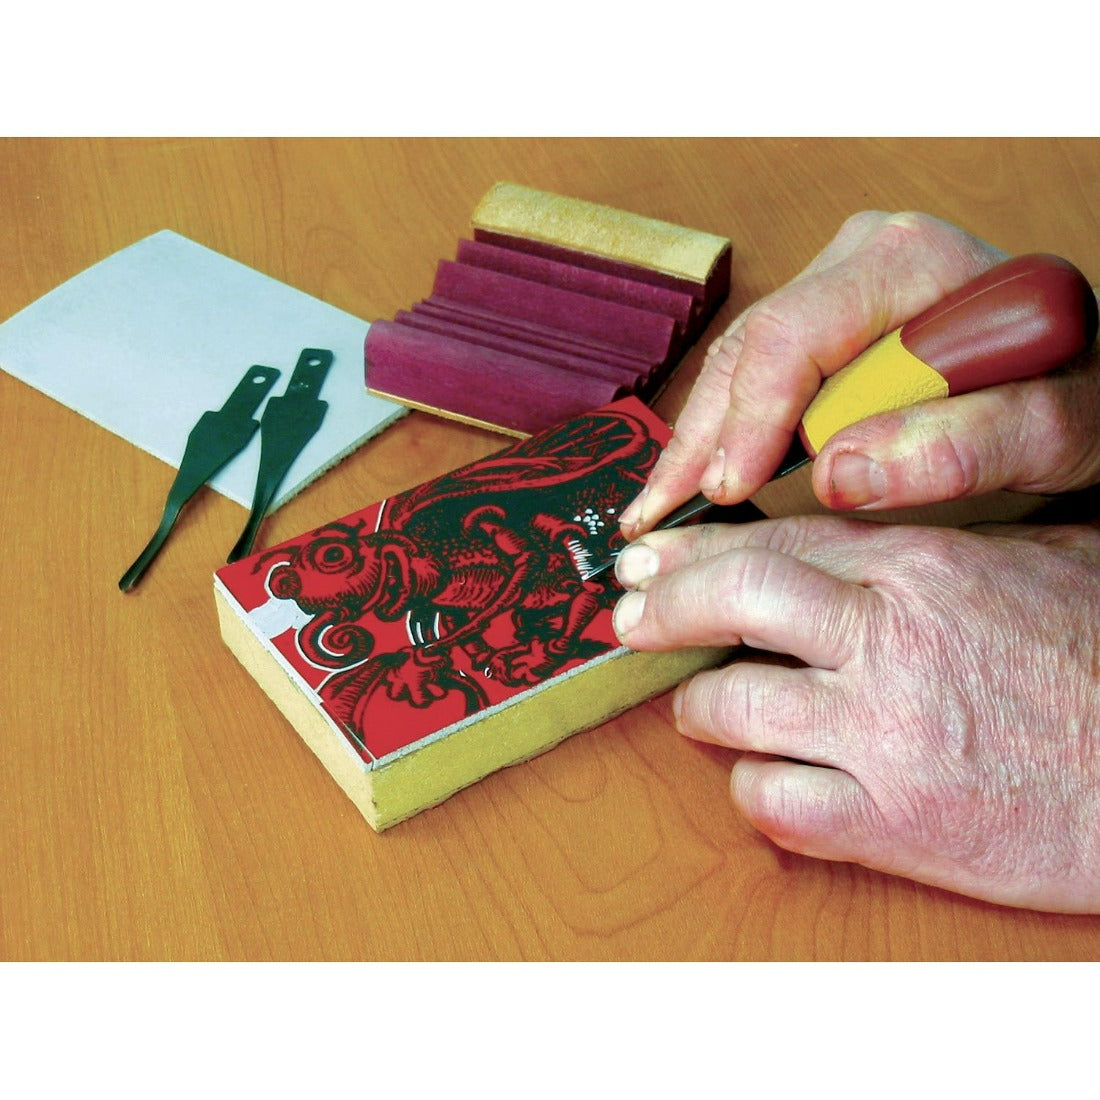 image showing one wide gouge being used to carve into a lino which is affixed to a block. User carving aa relief image into the lino. A slipstrop and to other gouge blades lying on the table